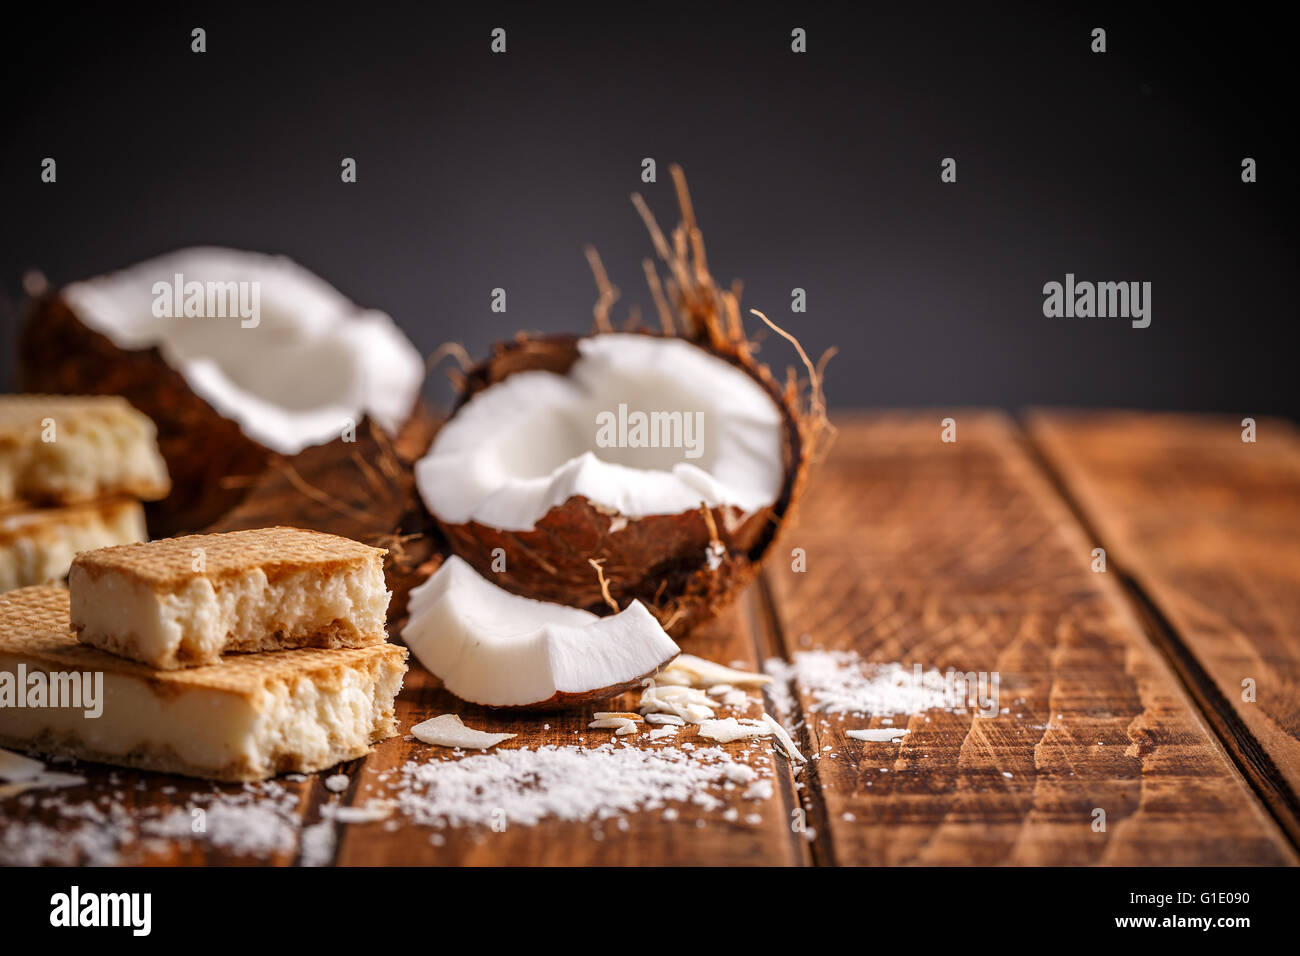 Homemade chocolate wafers on wooden background Stock Photo